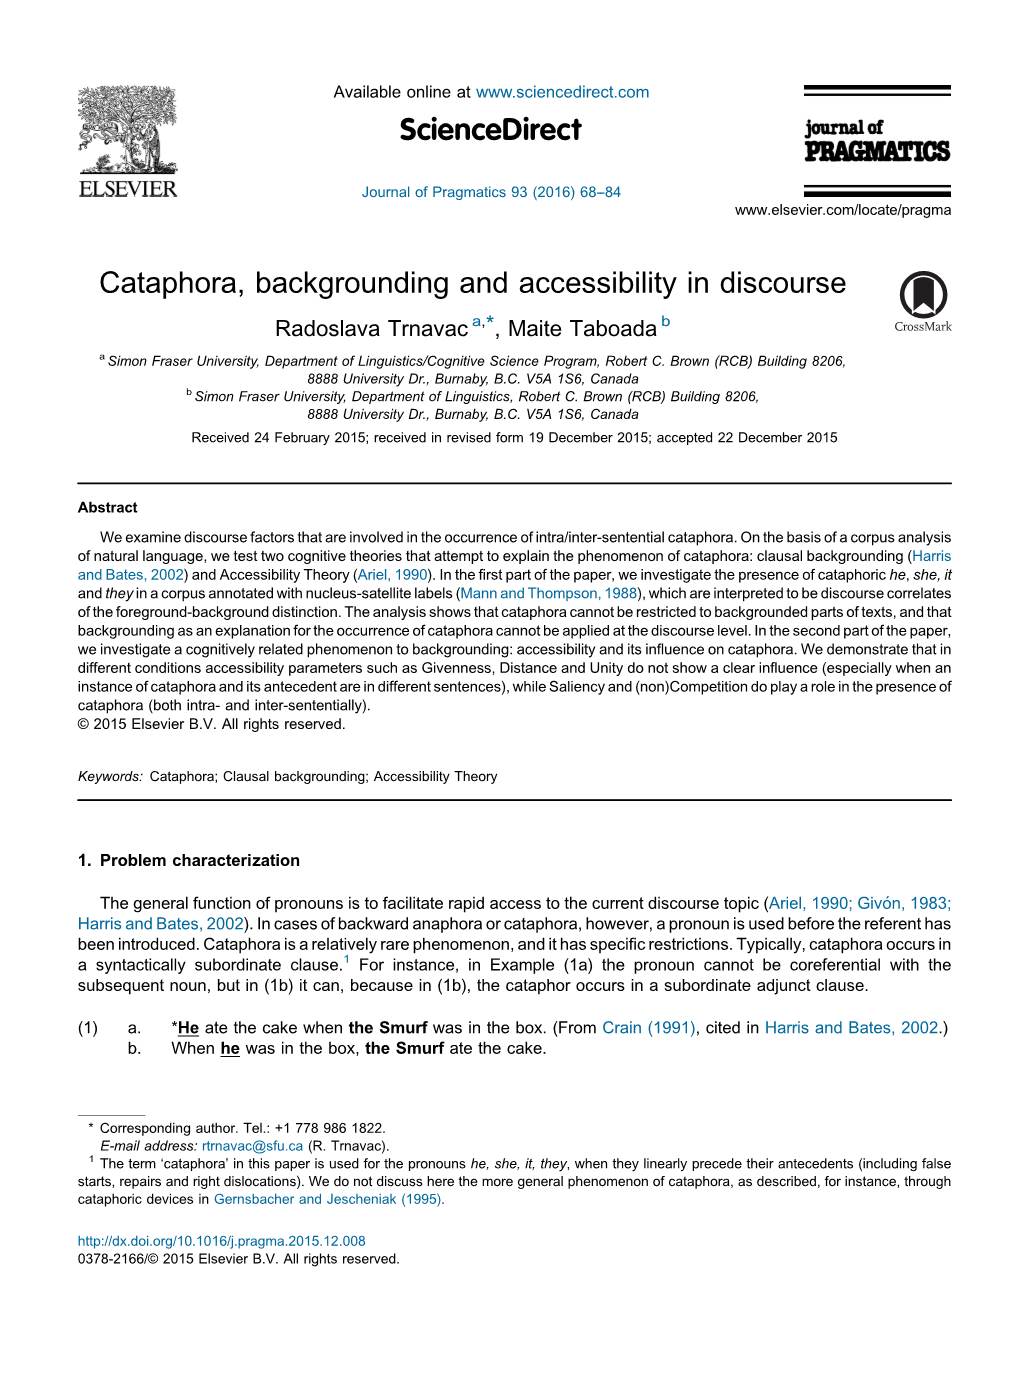 Cataphora, Backgrounding and Accessibility in Discourse